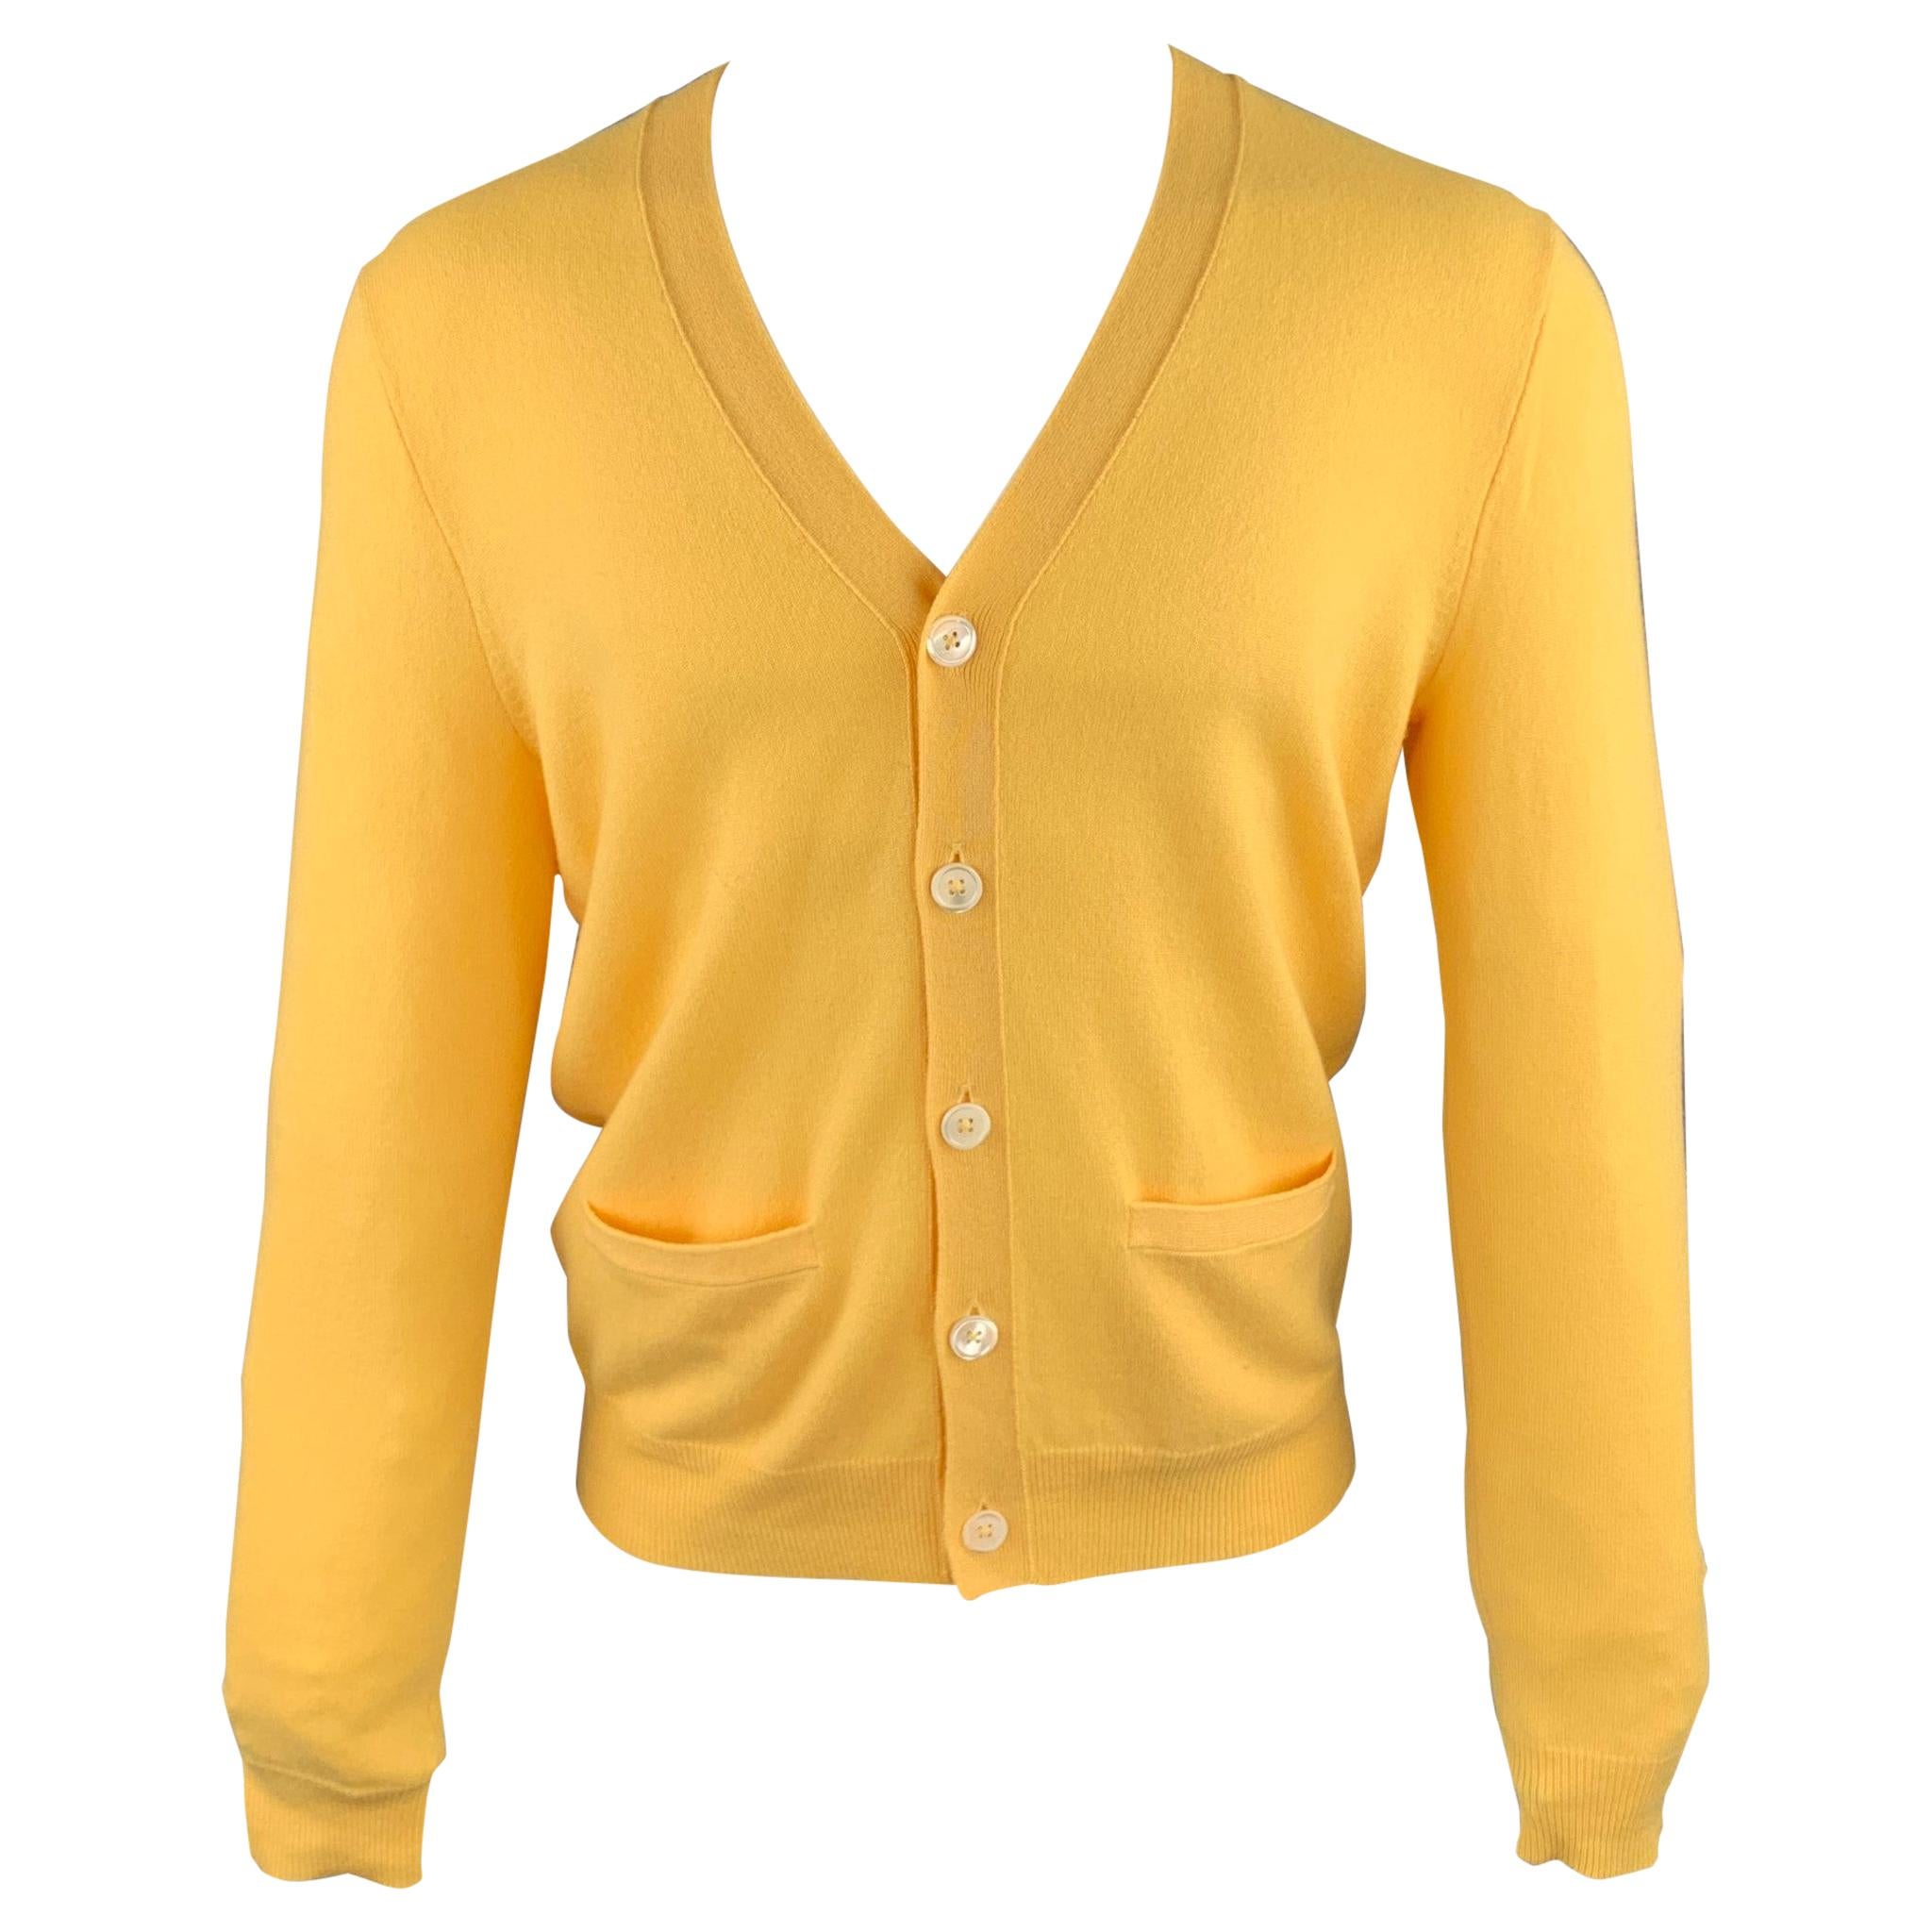 RALPH LAUREN Size S Yellow Cashmere Buttoned Cardigan